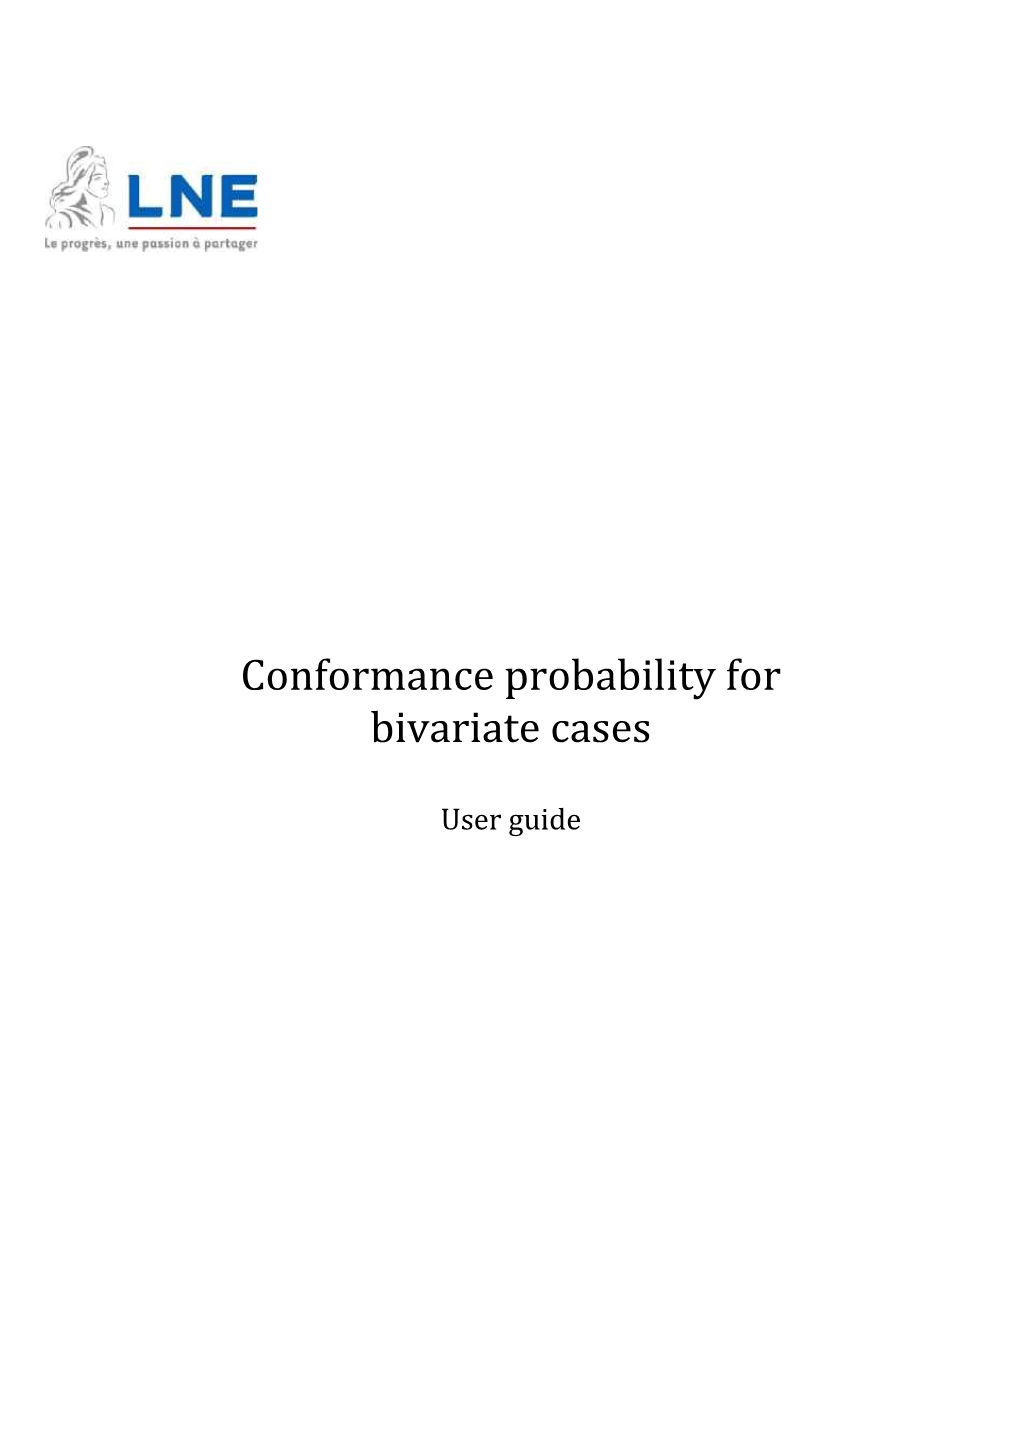 User Manual of the Software : Conformance Probability for Bivariate Cases